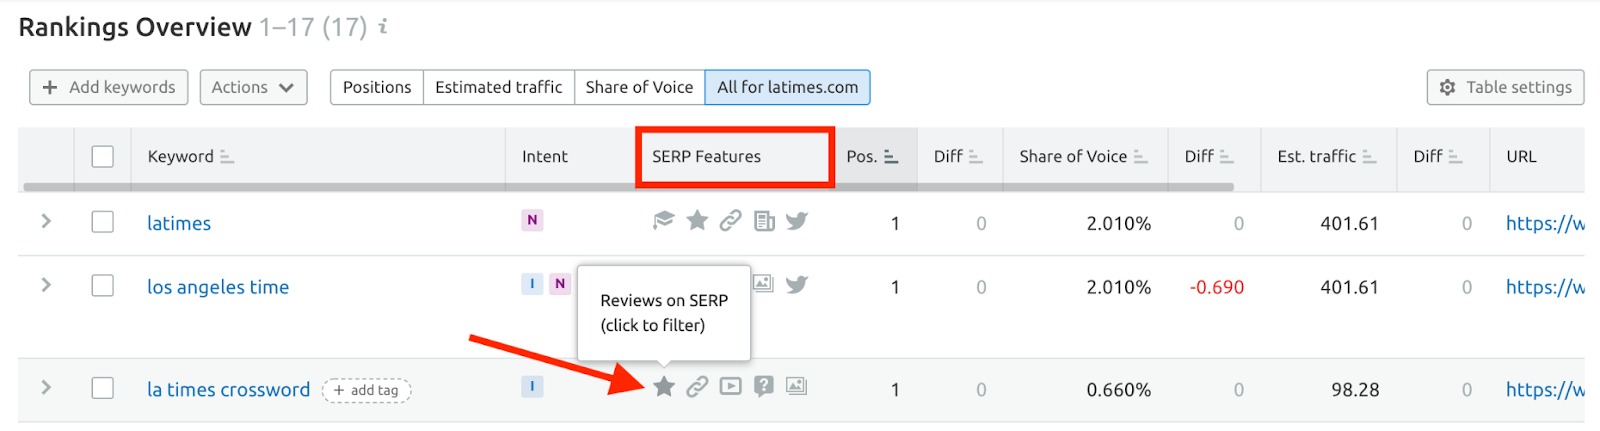 What Semrush Tools Can I Use to Research SERP Features? image 1